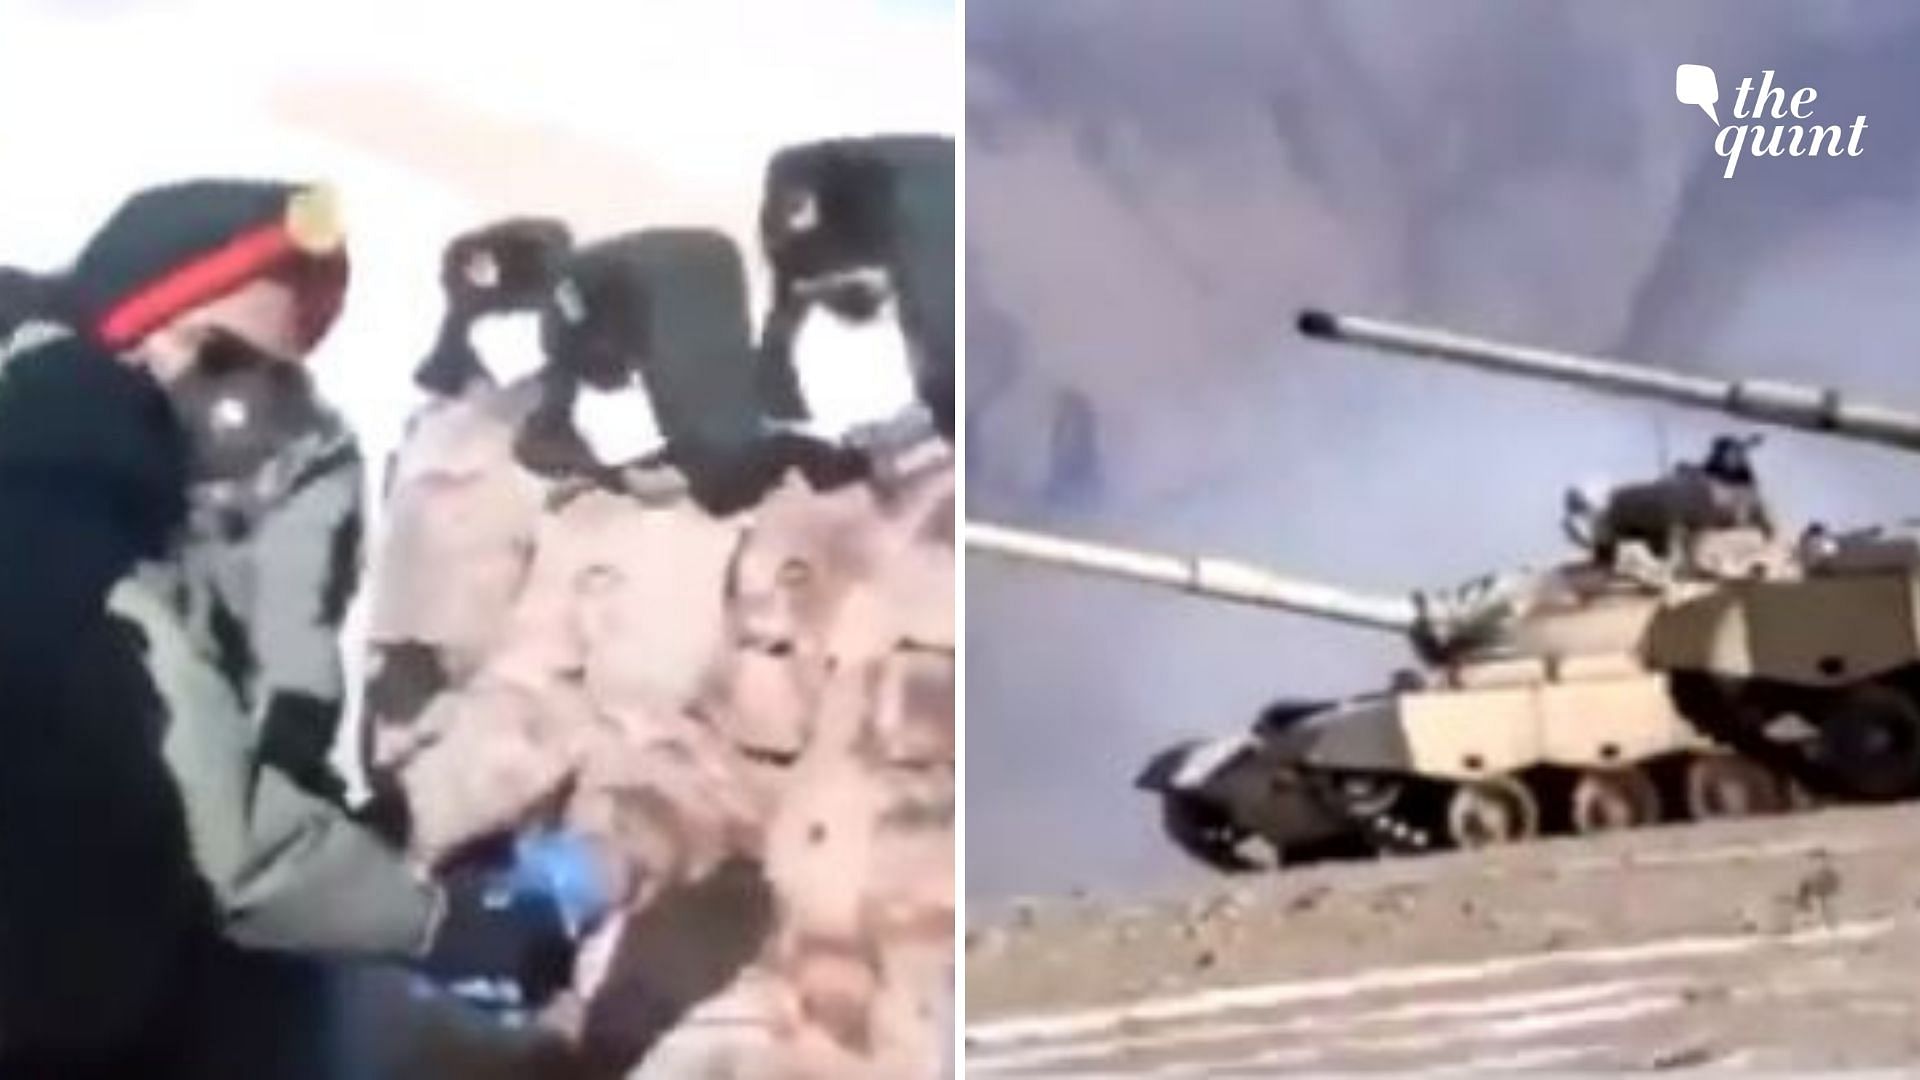 In the 1.15-minute clip being shared on social media, visuals of the formal meeting of the disengagement and the tanks of the Indian Army and Chinese PLA being disengaged can be seen.